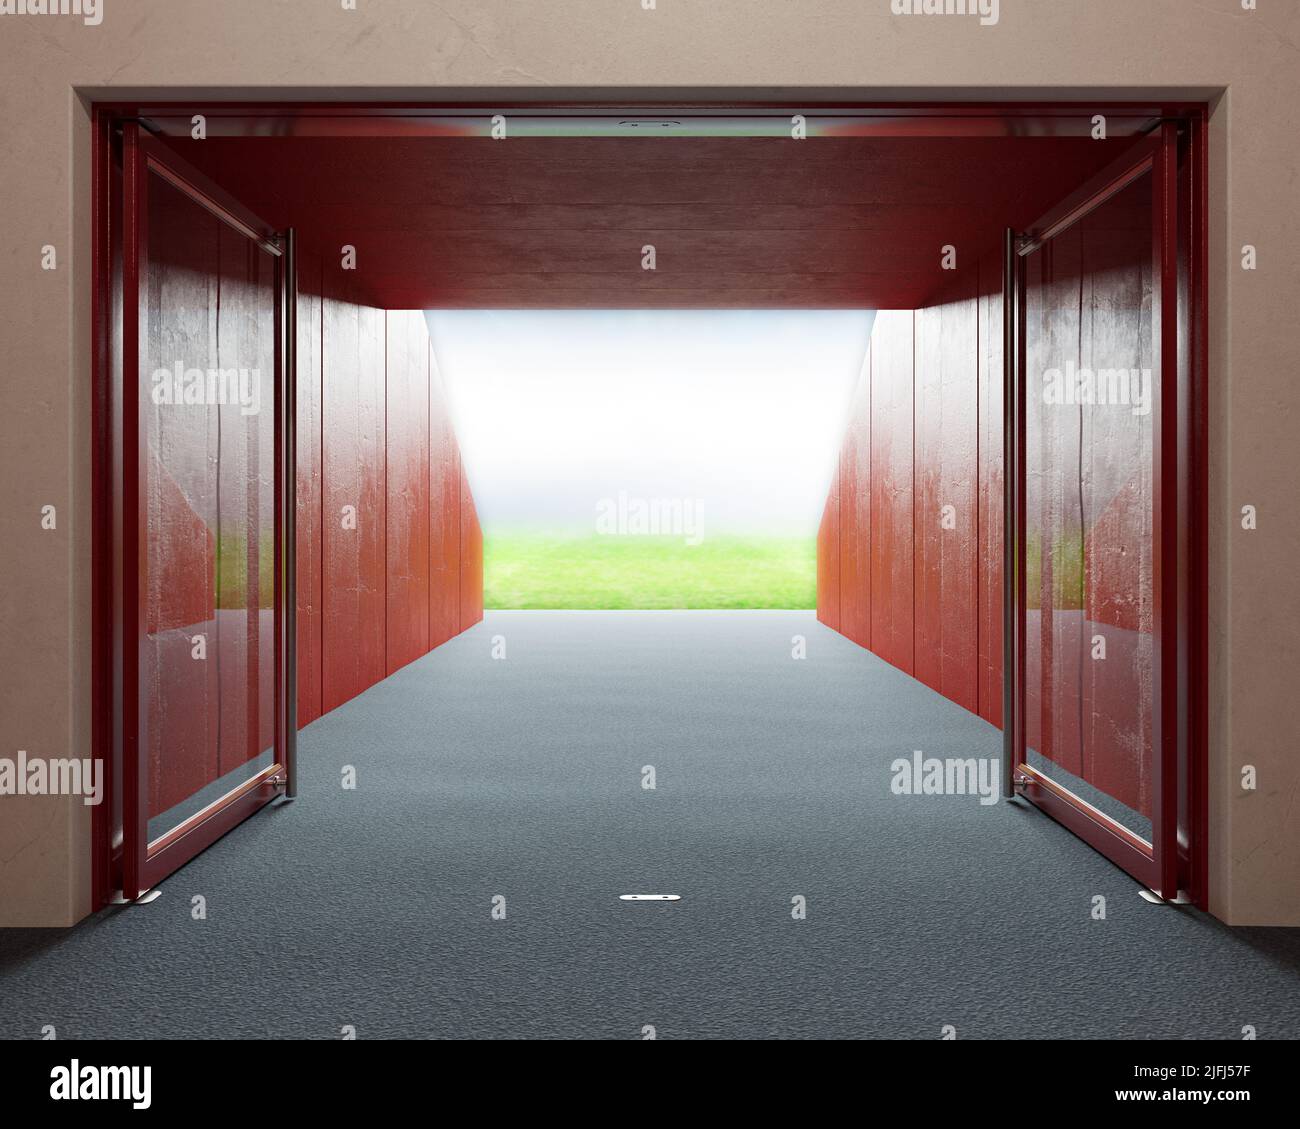 A look down a predominantly red stadium sports corridor through open glass doors to a lit arena in the distance - 3D render Stock Photo